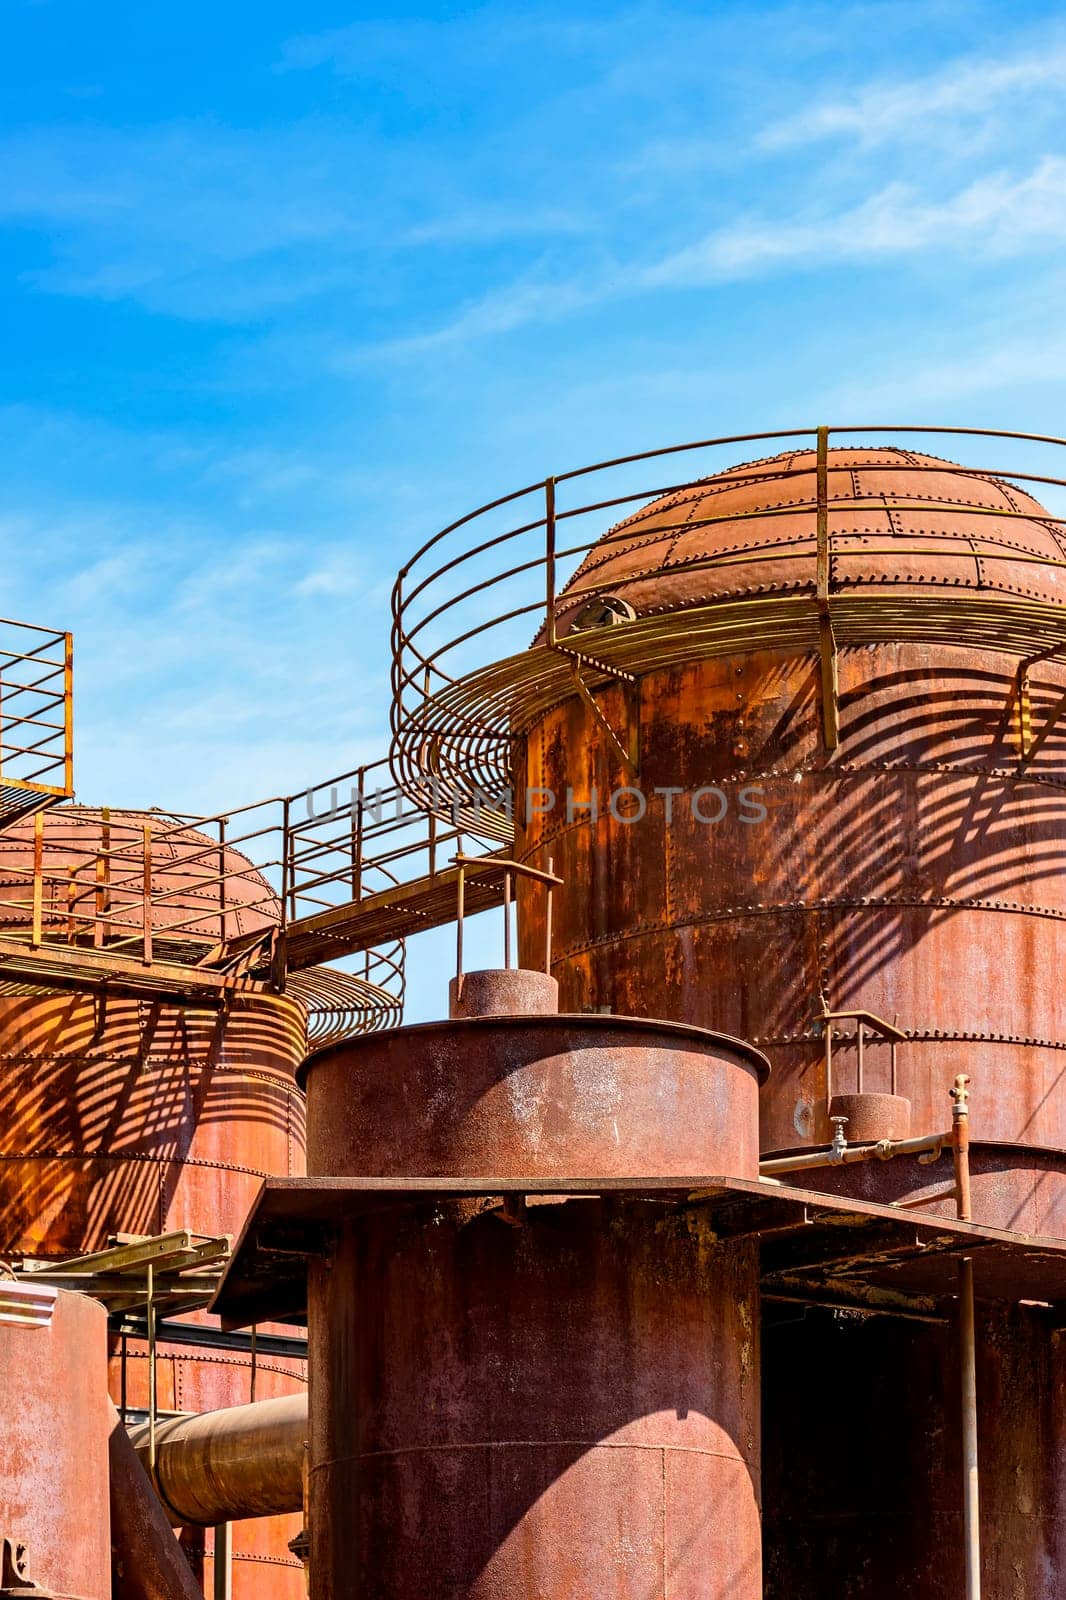 Old machinery tanks and infrastructure of an iron ore handling industry in the state of Minas Gerais, Brazil